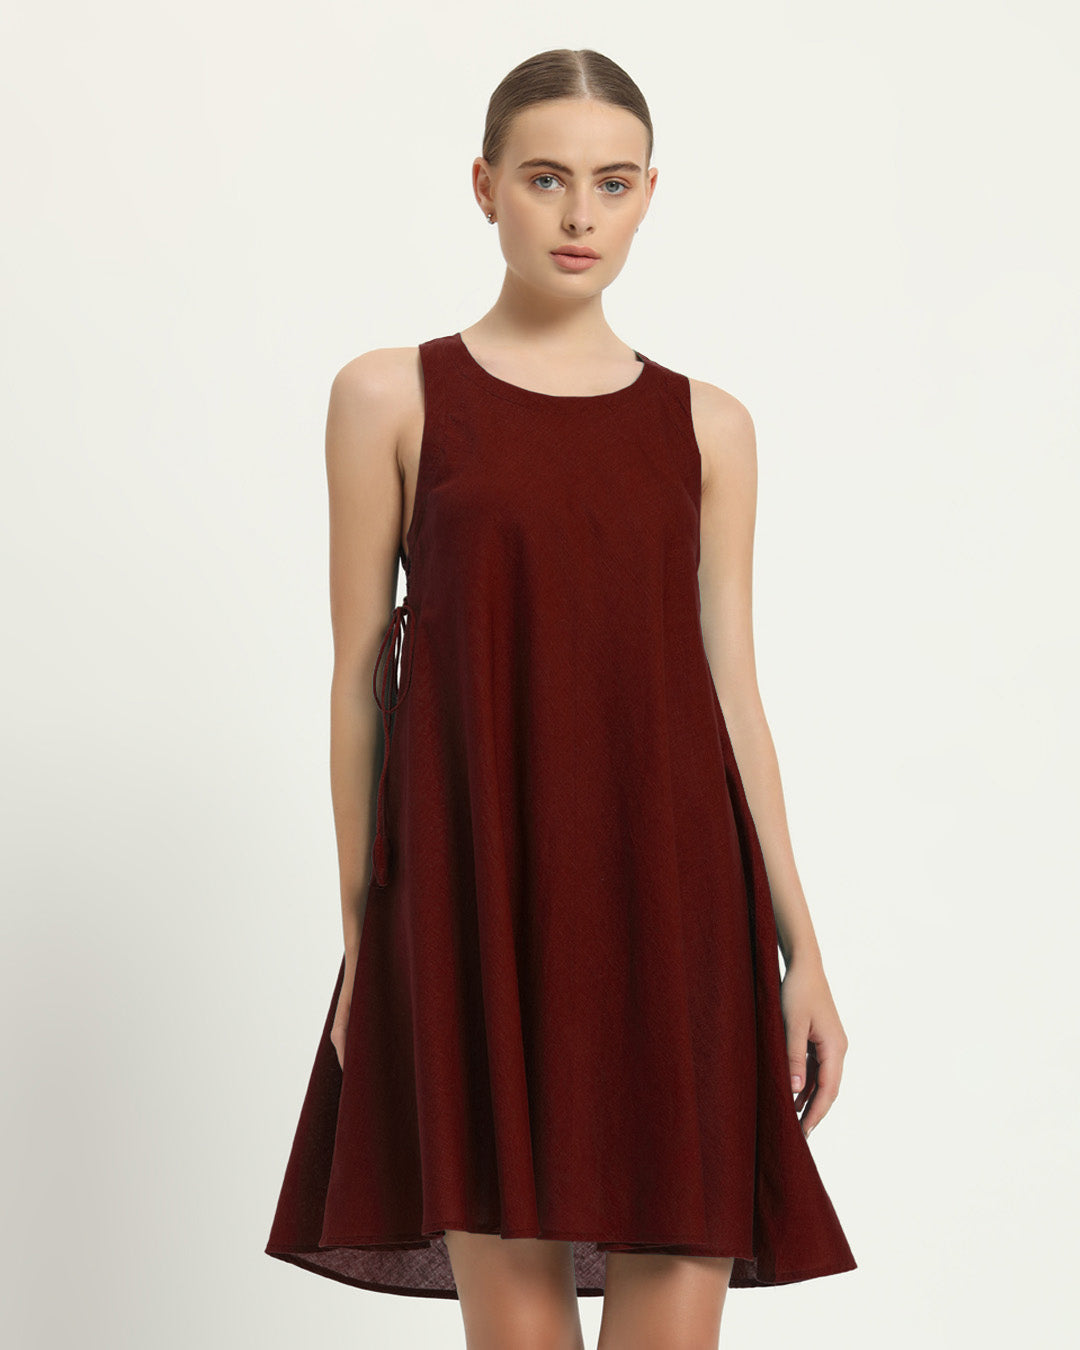 The Rhede Rouge Cotton Dress